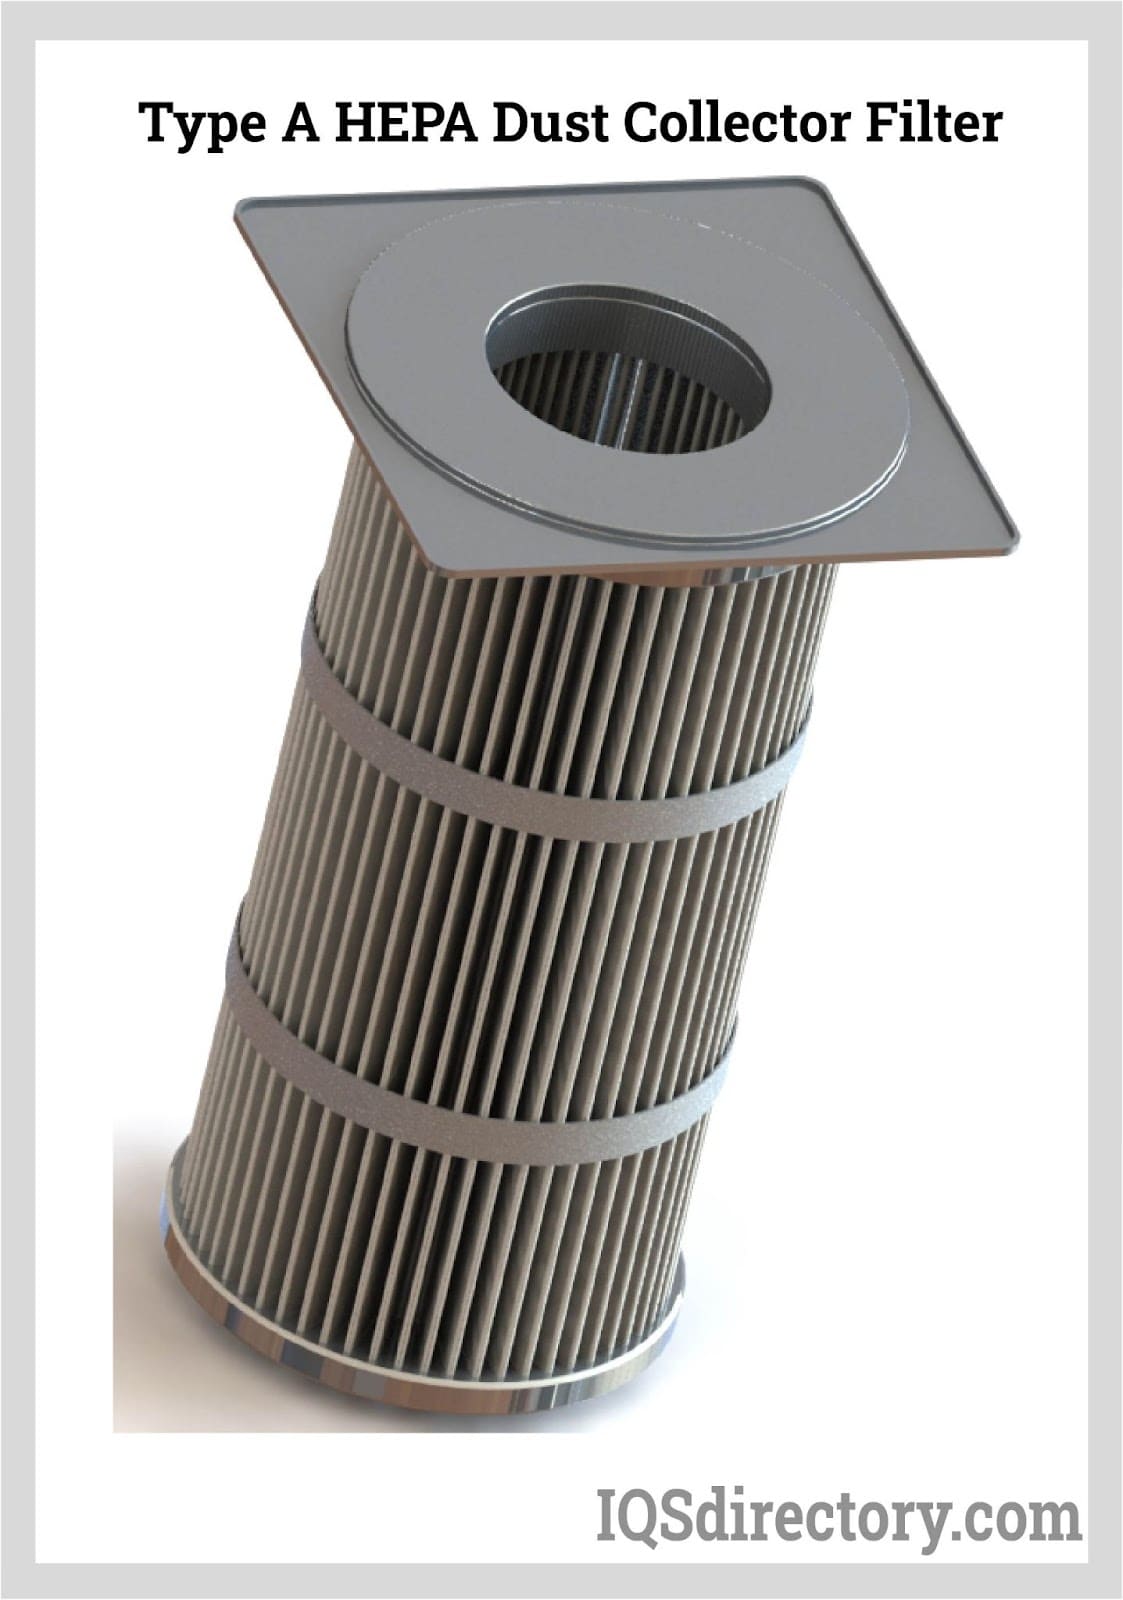 Type A HEPA Dust Collector Filter